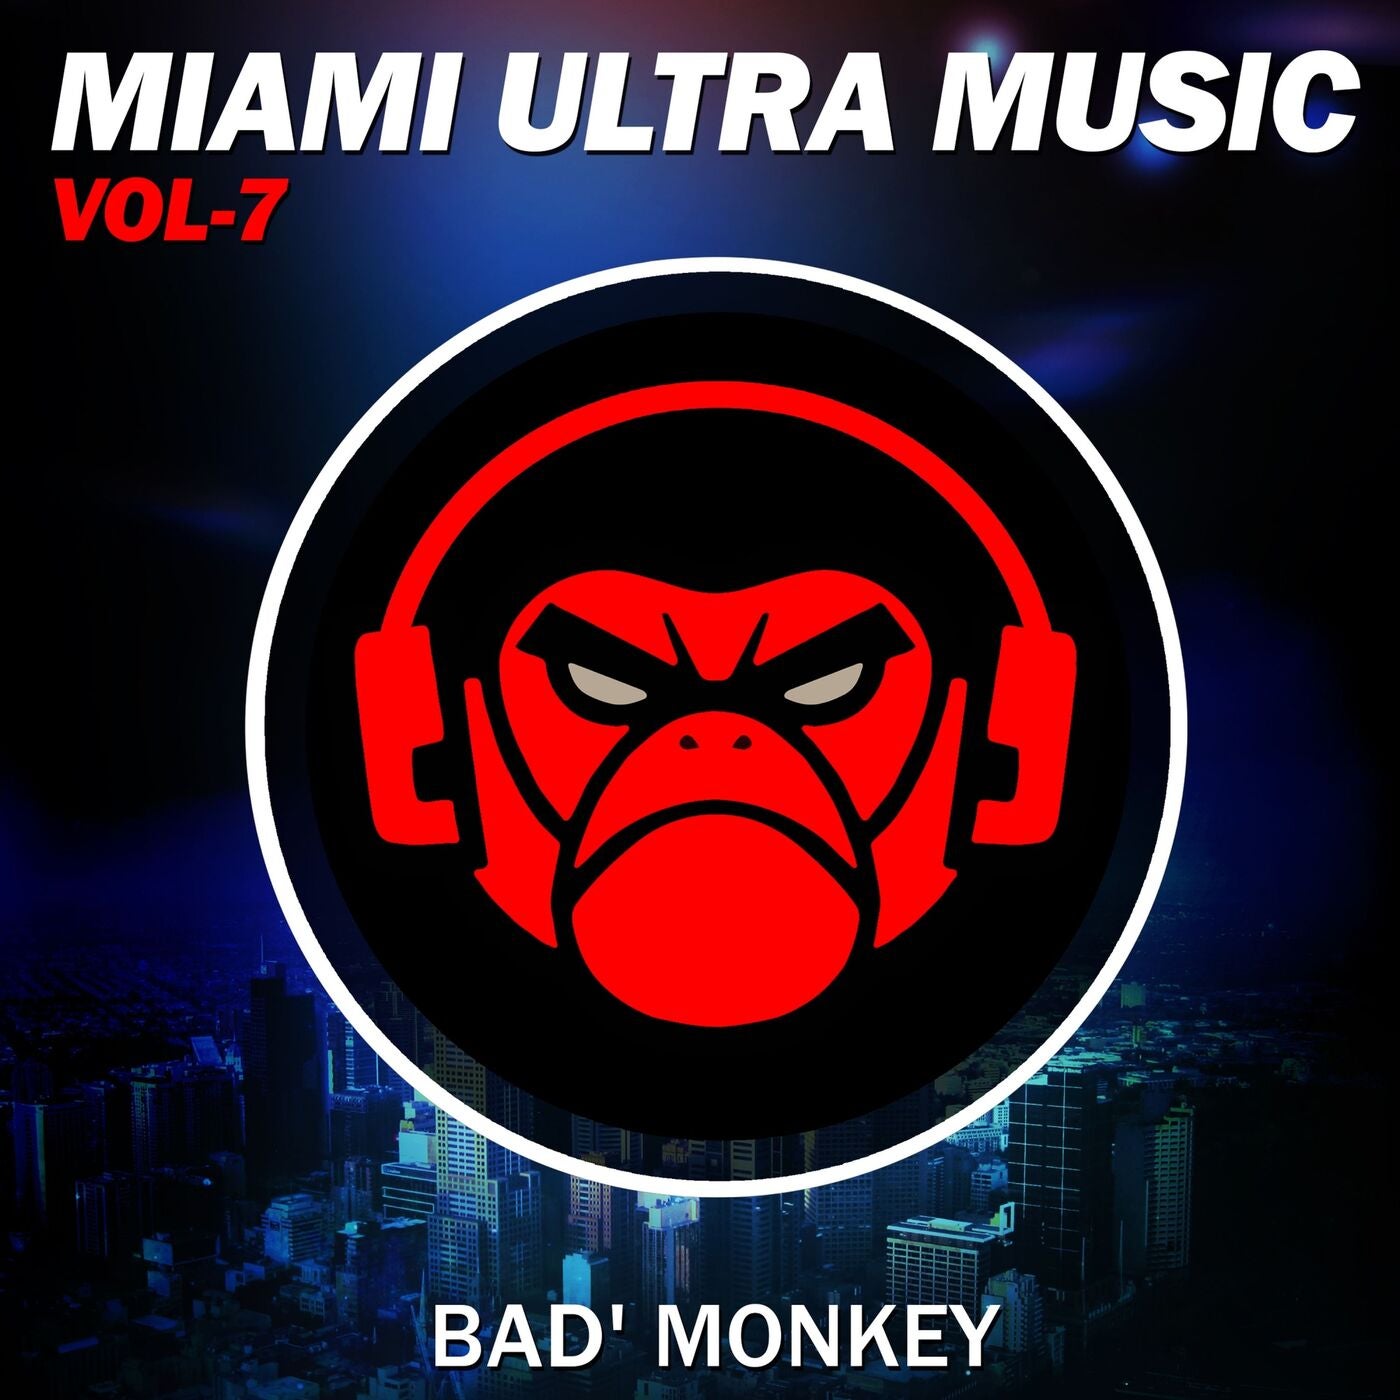 Miami Ultra Music Vol.7, compiled by Bad Monkey